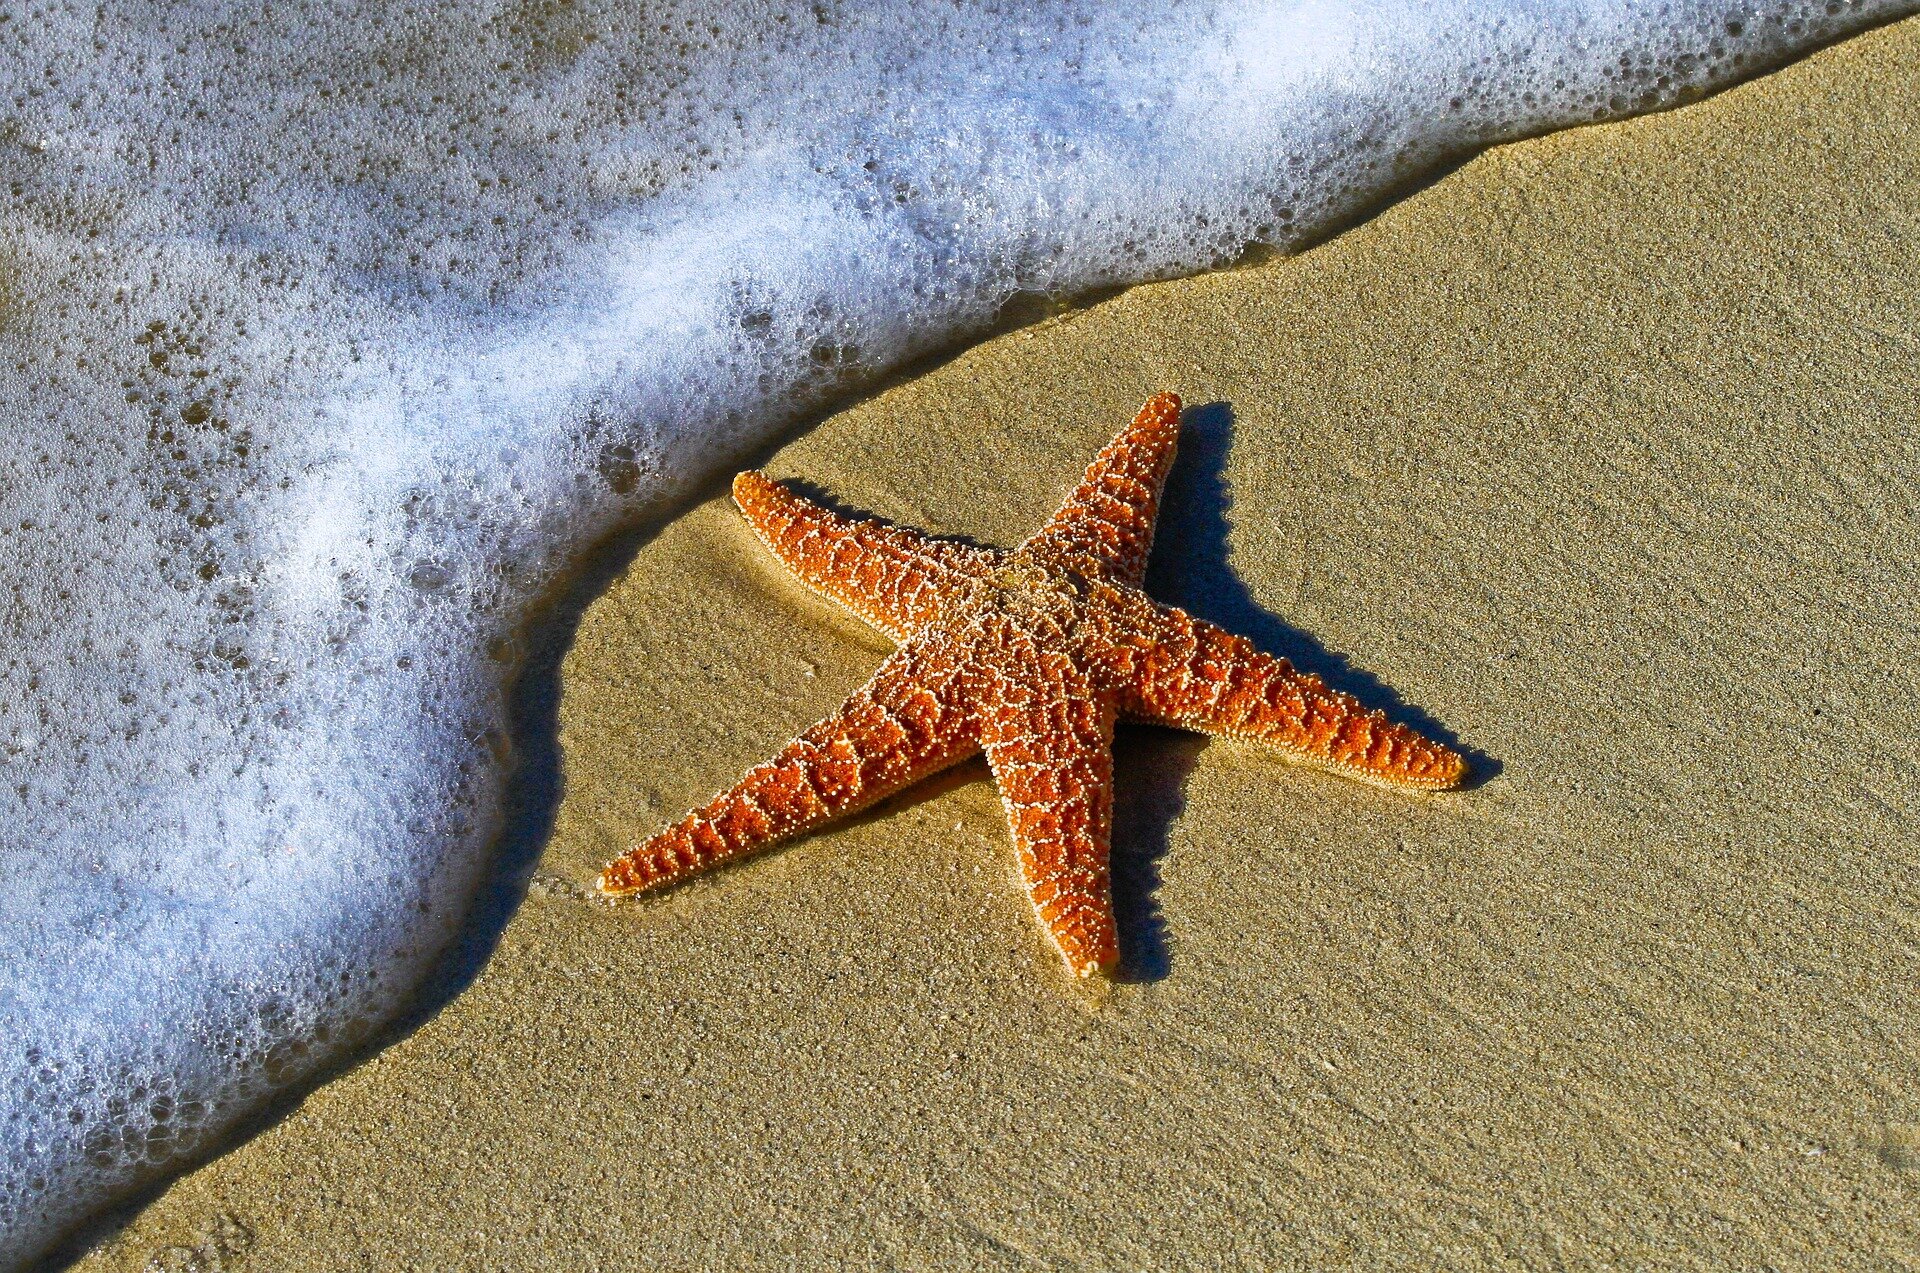 Disease nearly wiped out sea stars on California's Central Coast. Is the population recovering?